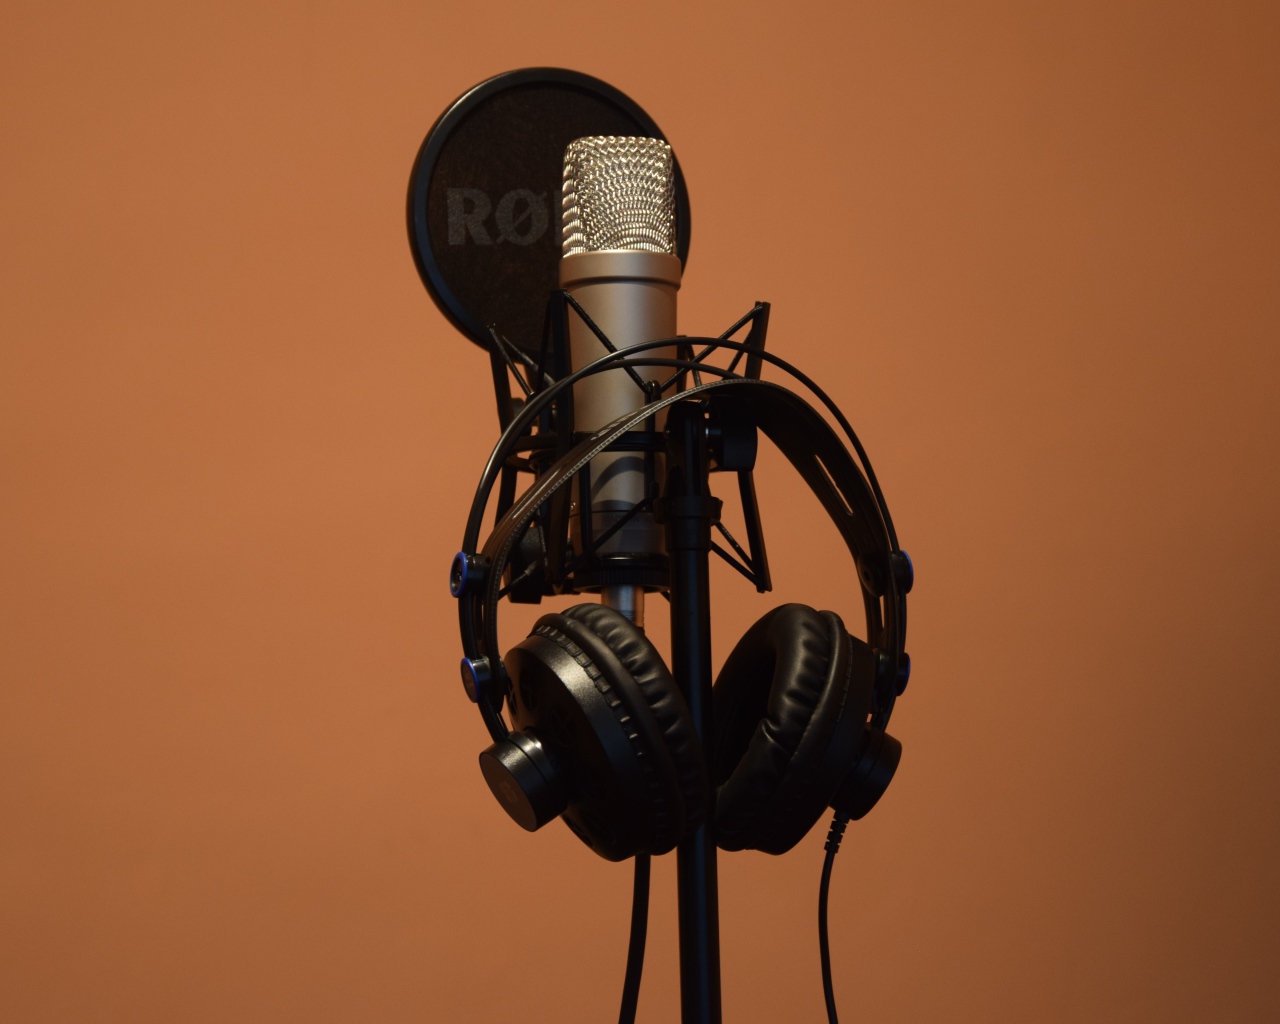 Condenser microphone with headphones on brown background